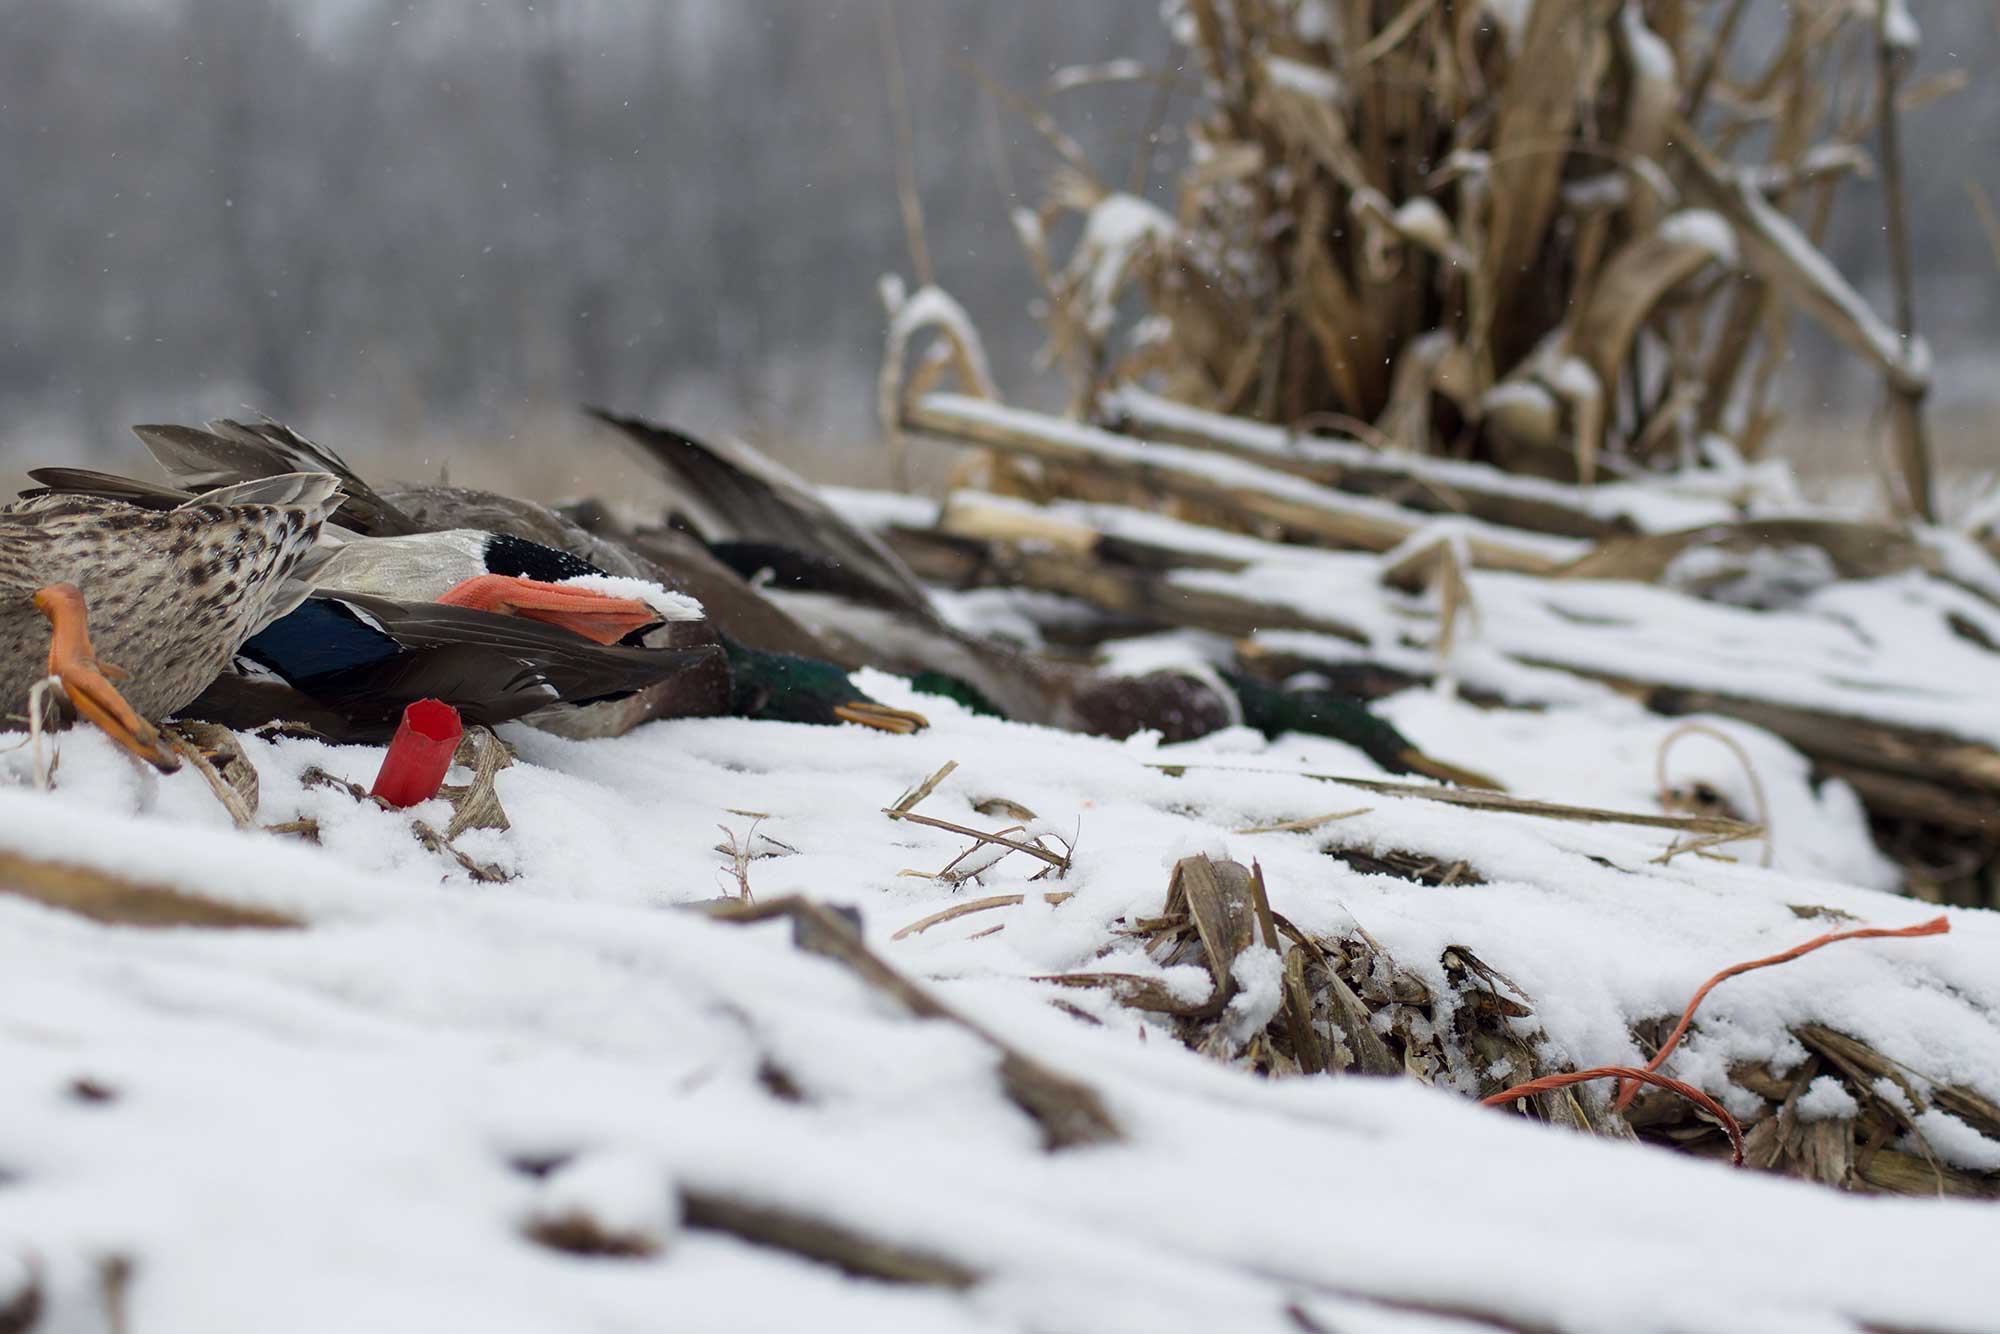 A snowy landscape for duck hunting